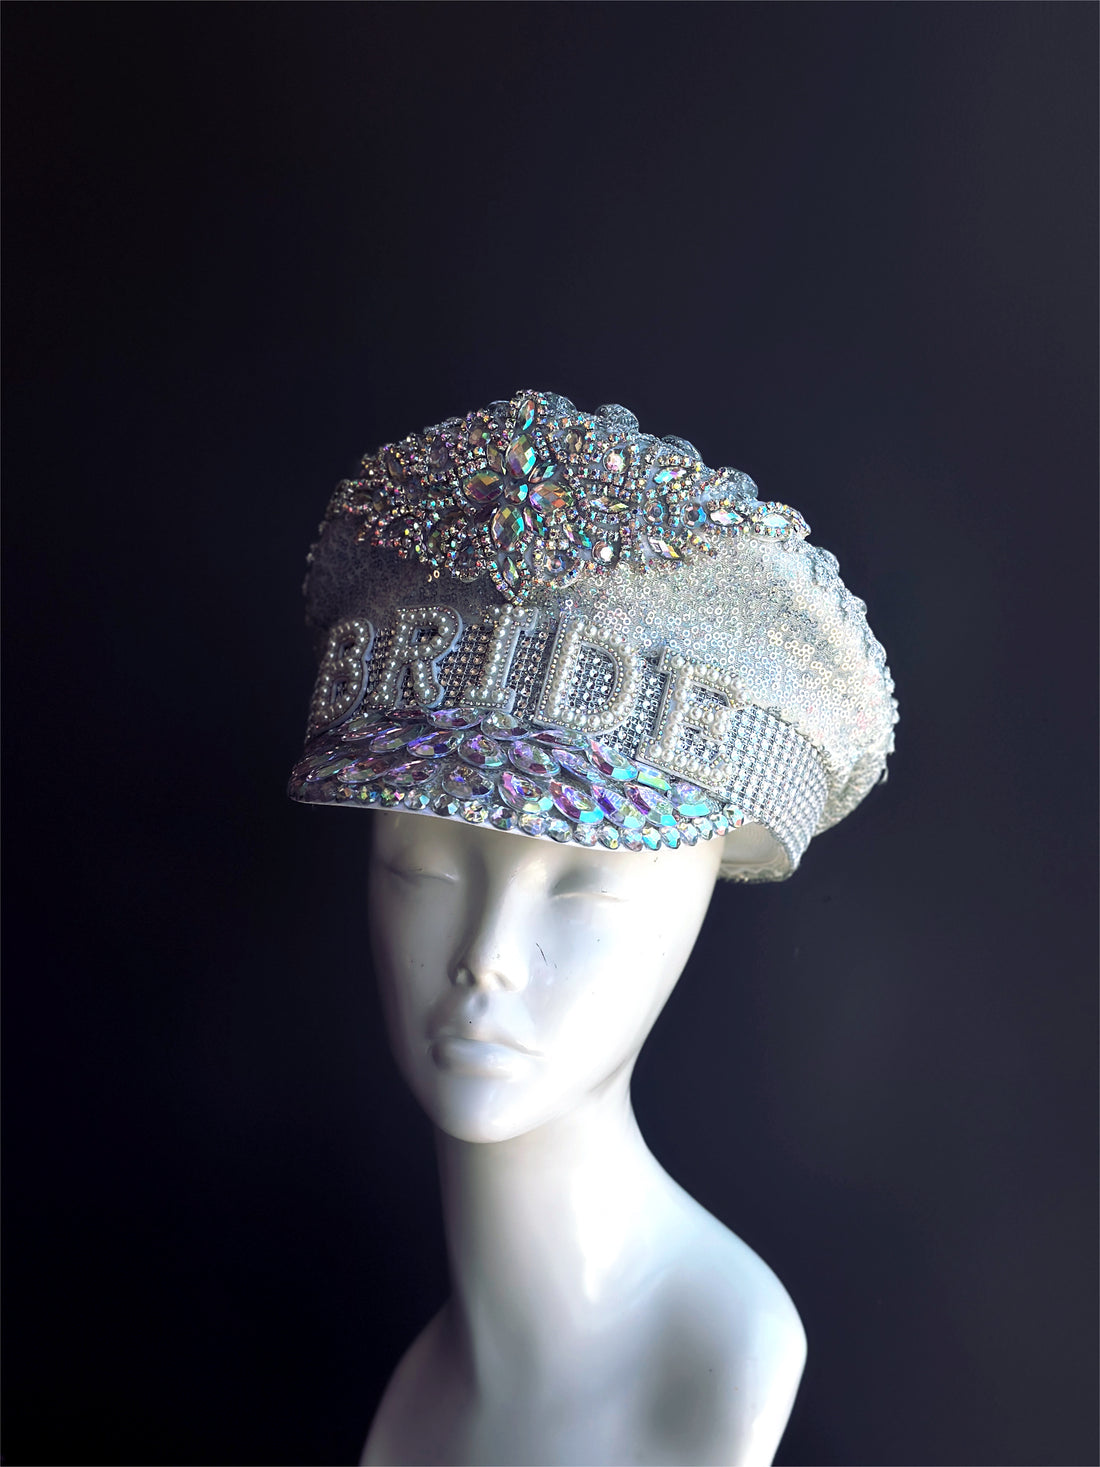 captains hat with silver sequins, iridescent crystals, and pearls with &quot;bride&quot; on the front.